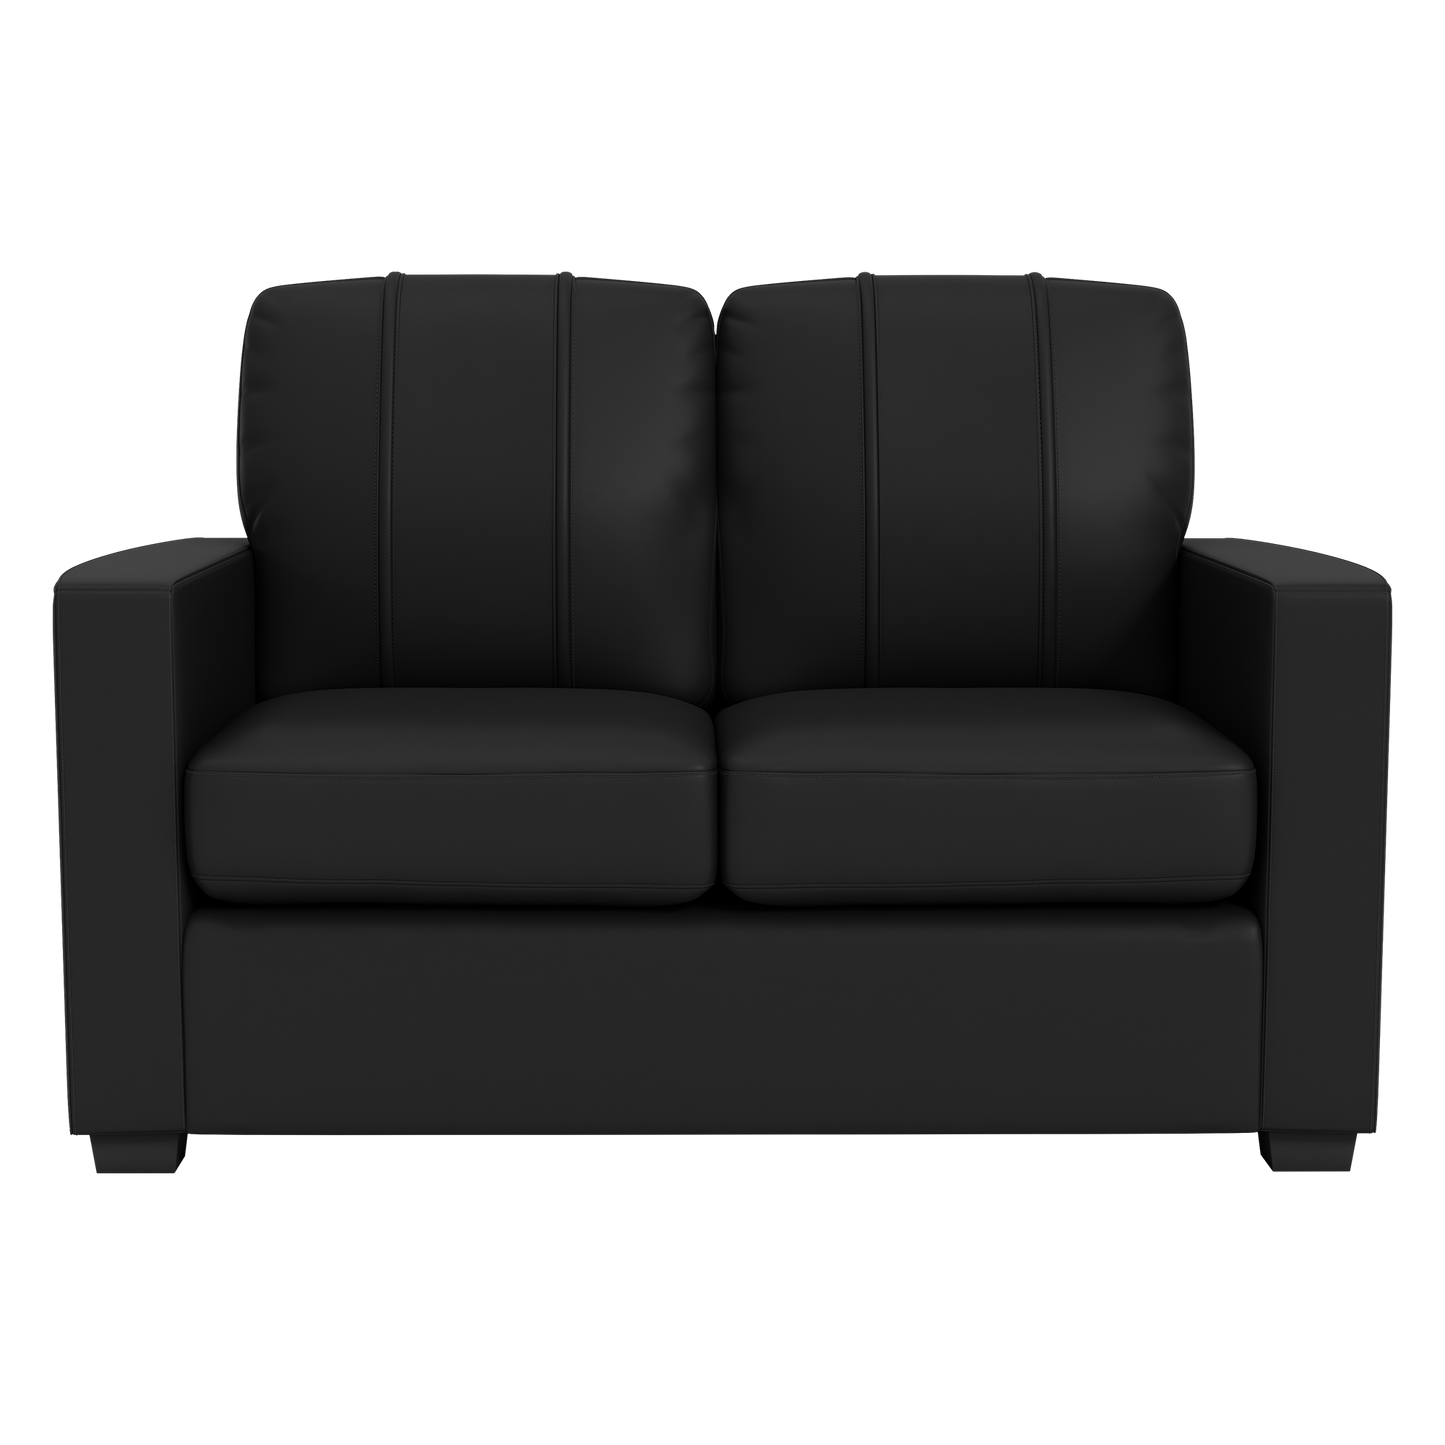 Silver Loveseat with Los Angeles Lakers Secondary